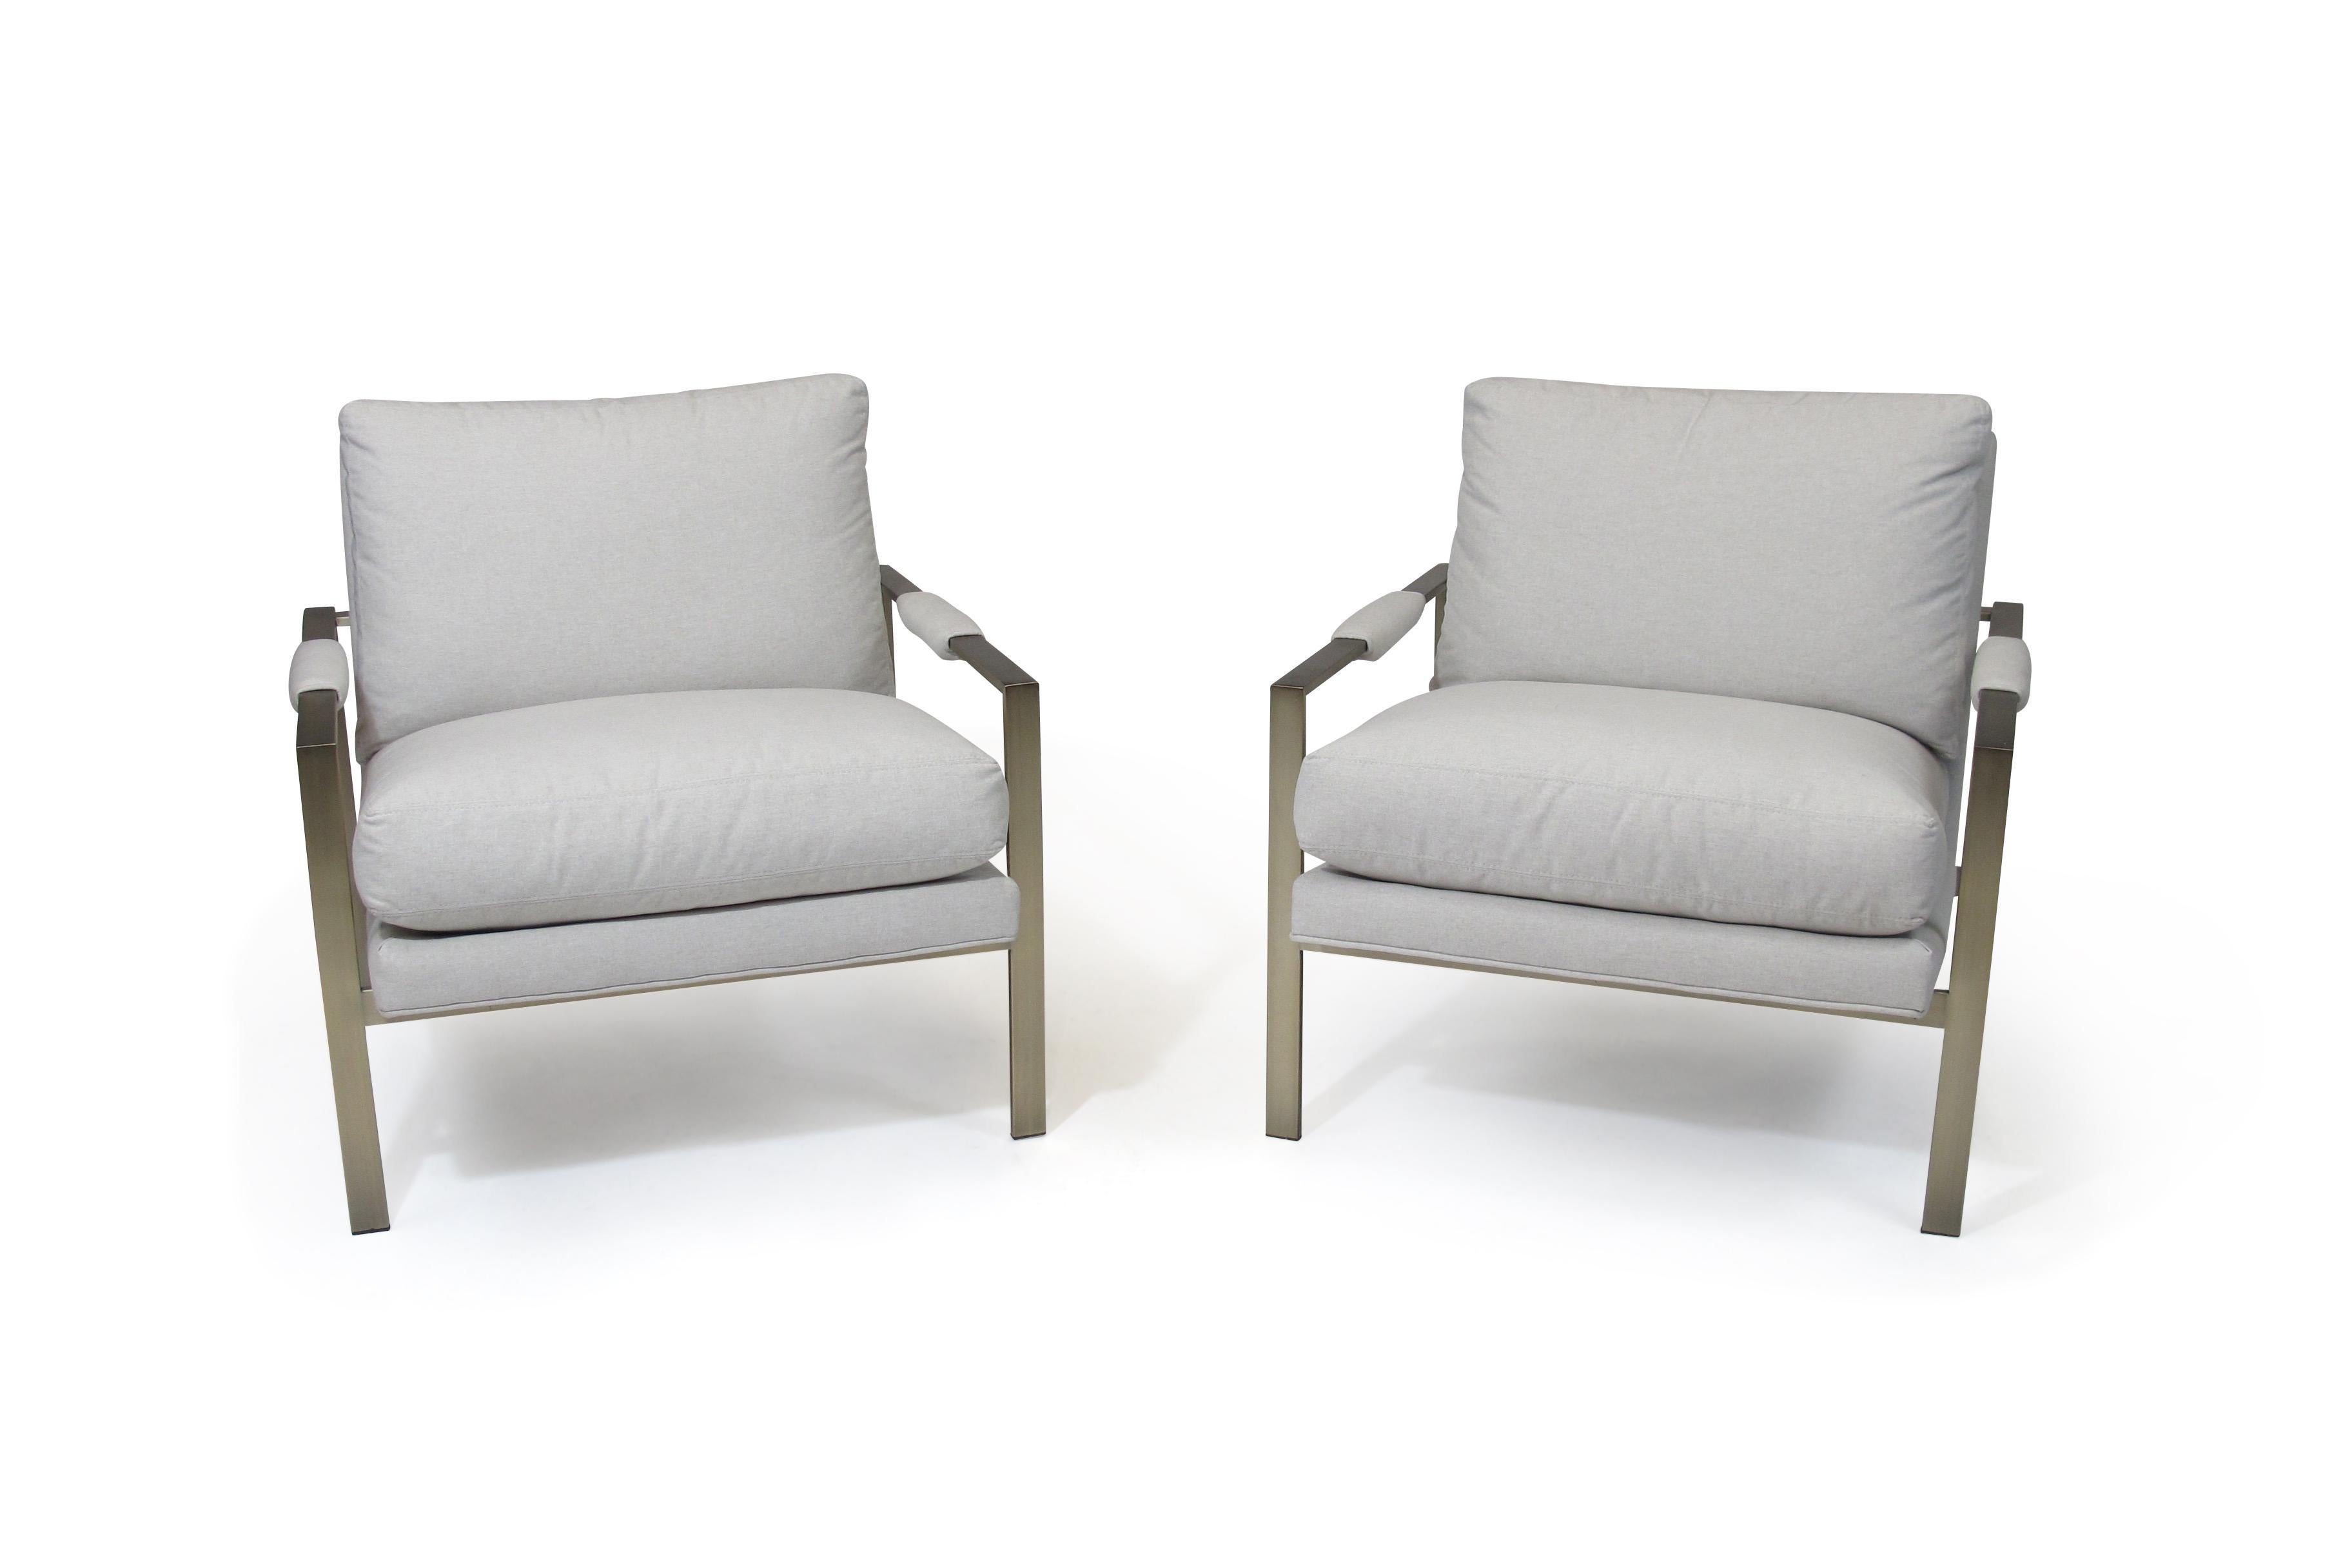 Midcentury Milo Baughman Brass Frame Lounge Chairs in Off-White Fabric For Sale 4